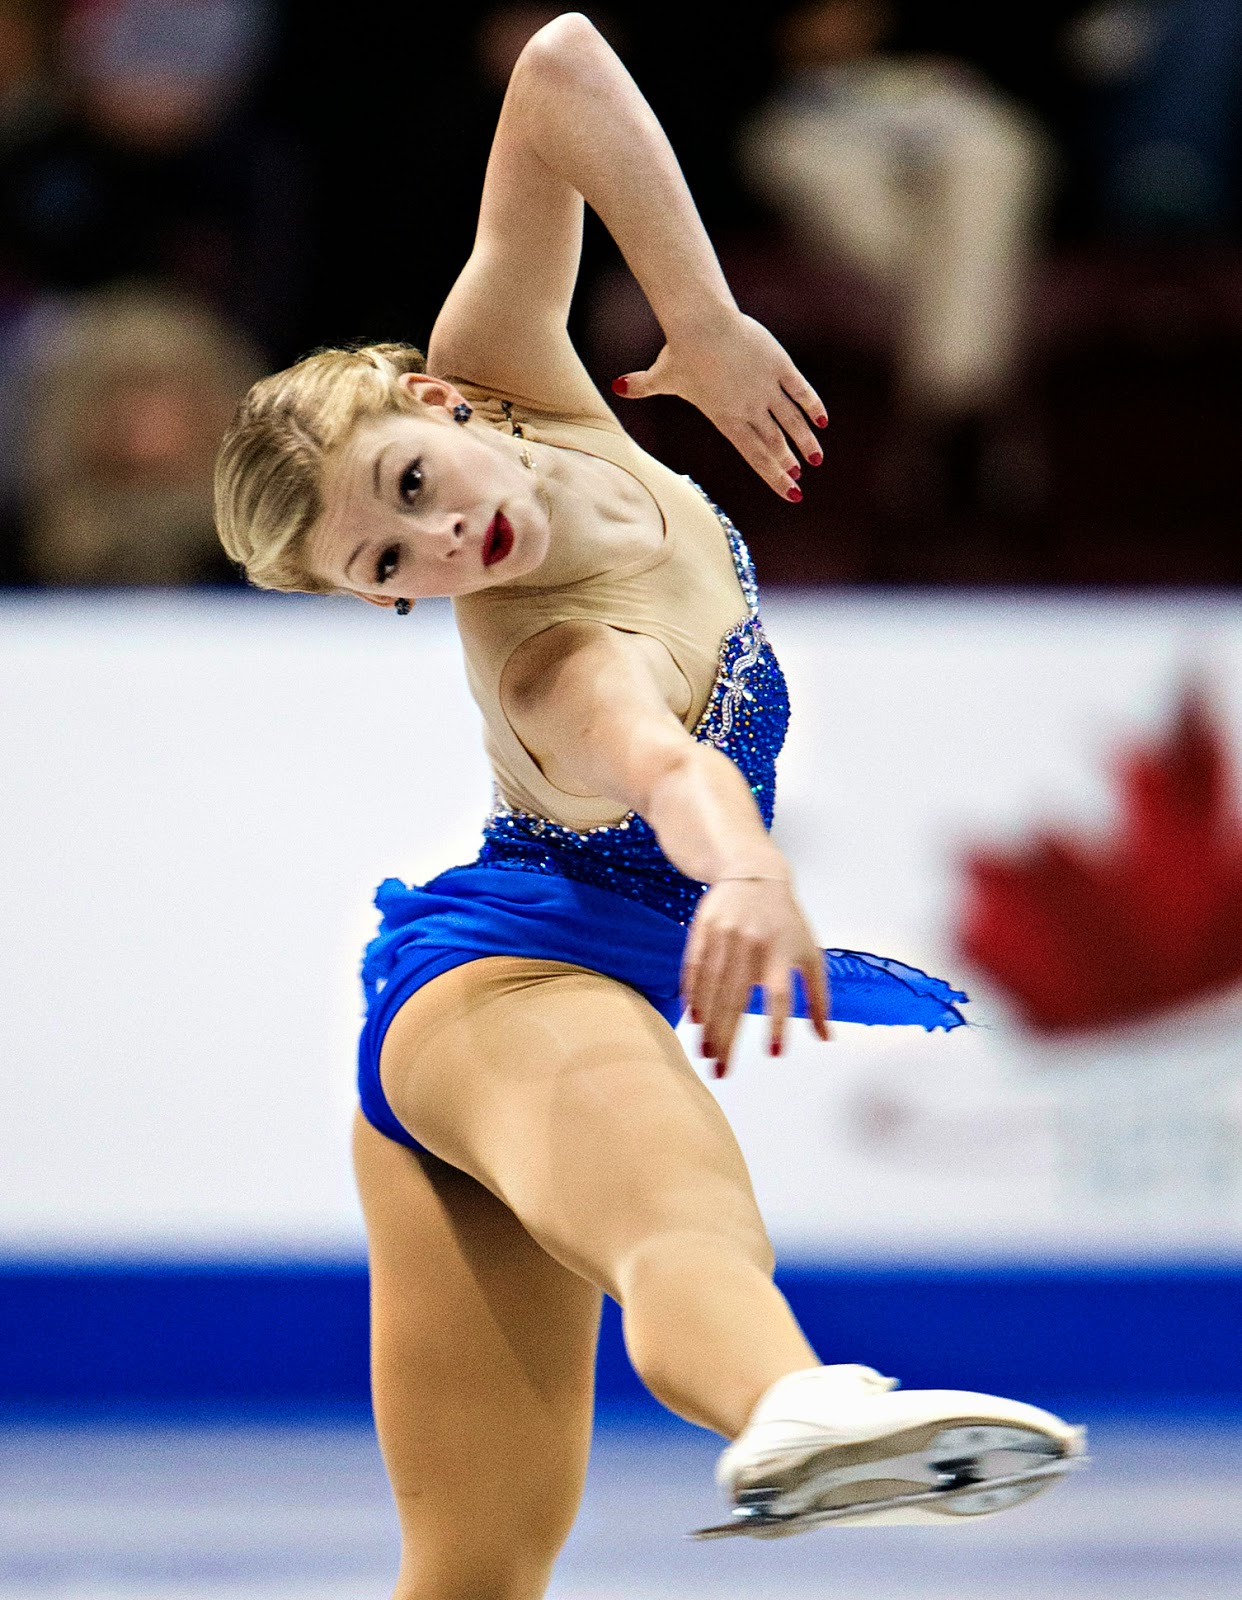 Grace Elizabeth Gold, known as Gracie Gold, is an American figure skater. 